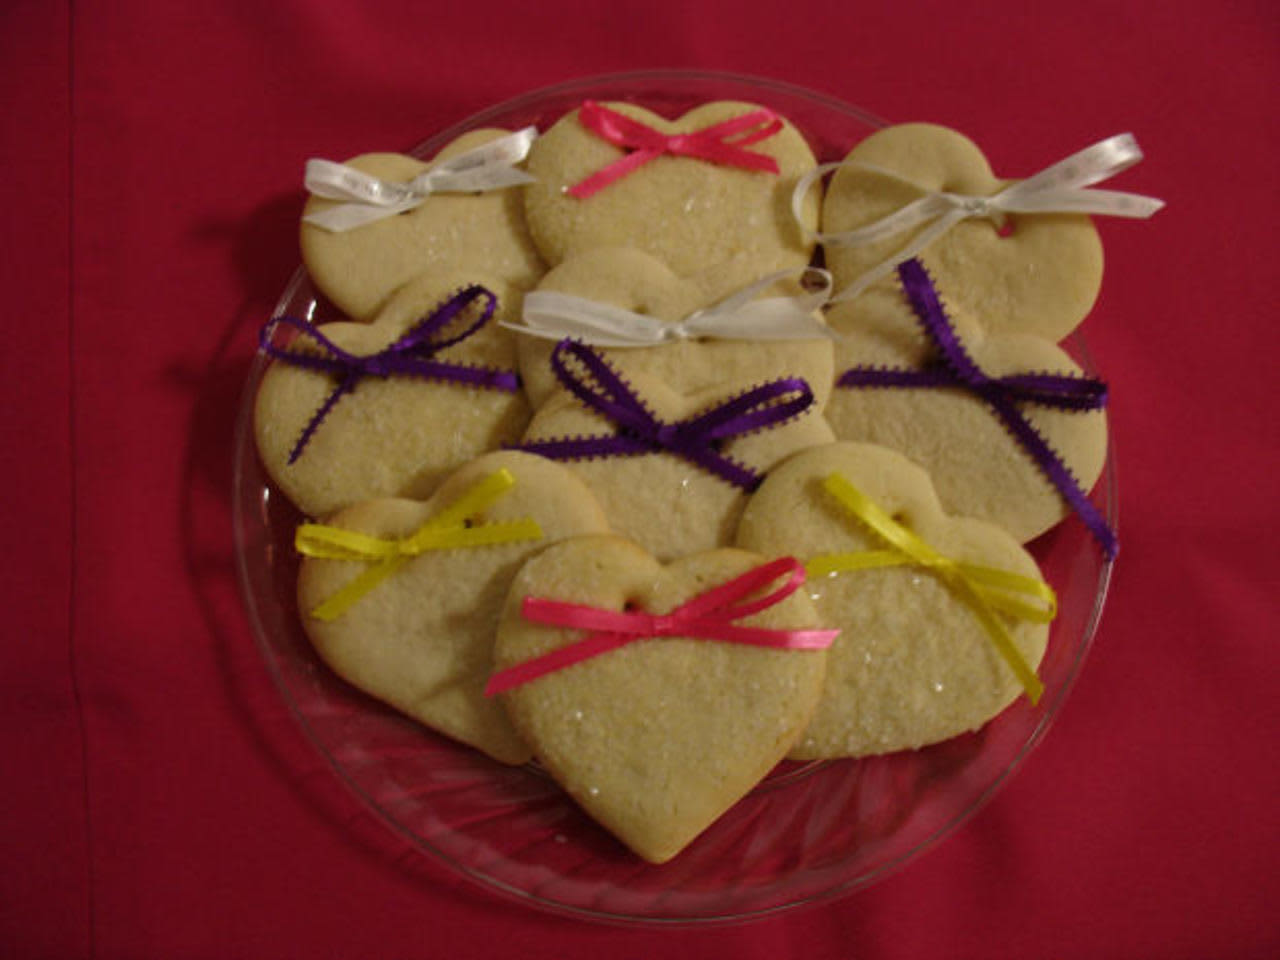 Decorate cookies for that special someone at a free Valentine's Day cookie event at the Trumbull Nature and Arts Center on Sunday, Feb. 7.